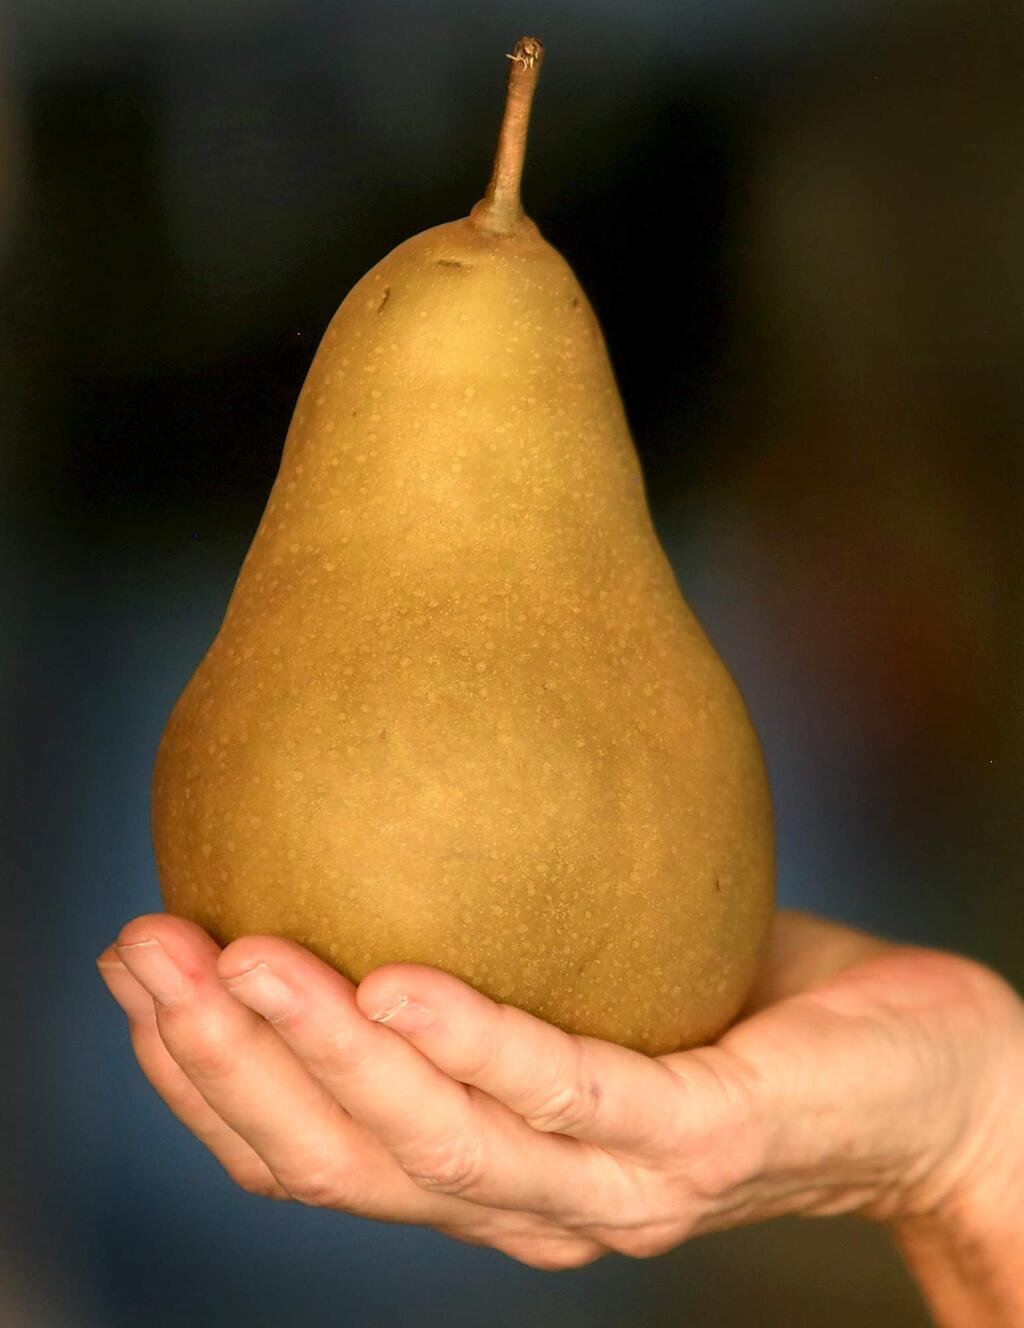 A golden bosc pear weighing in at nearly 1.2lbs, Monday Aug. 24, 2015 at Scully Packing Co. in Finley. (Kent Porter / Press Democrat) 2015